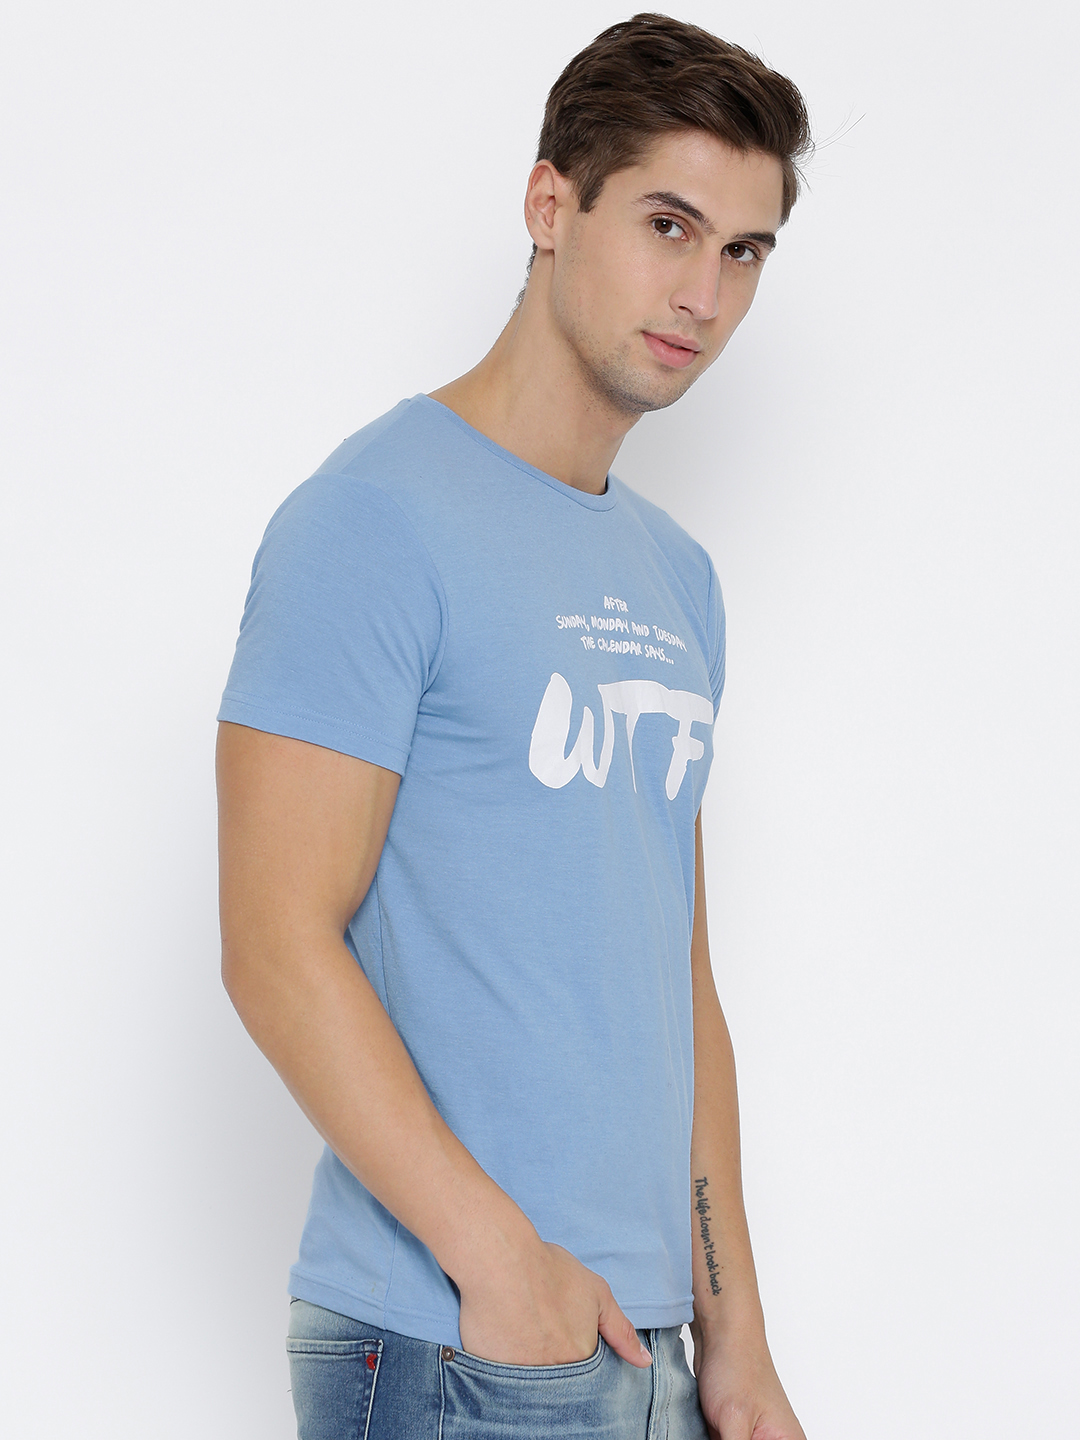 Buy TSX Pack of 3 Men's Cotton Stylish T-Shirt Online @ ₹899 from ShopClues